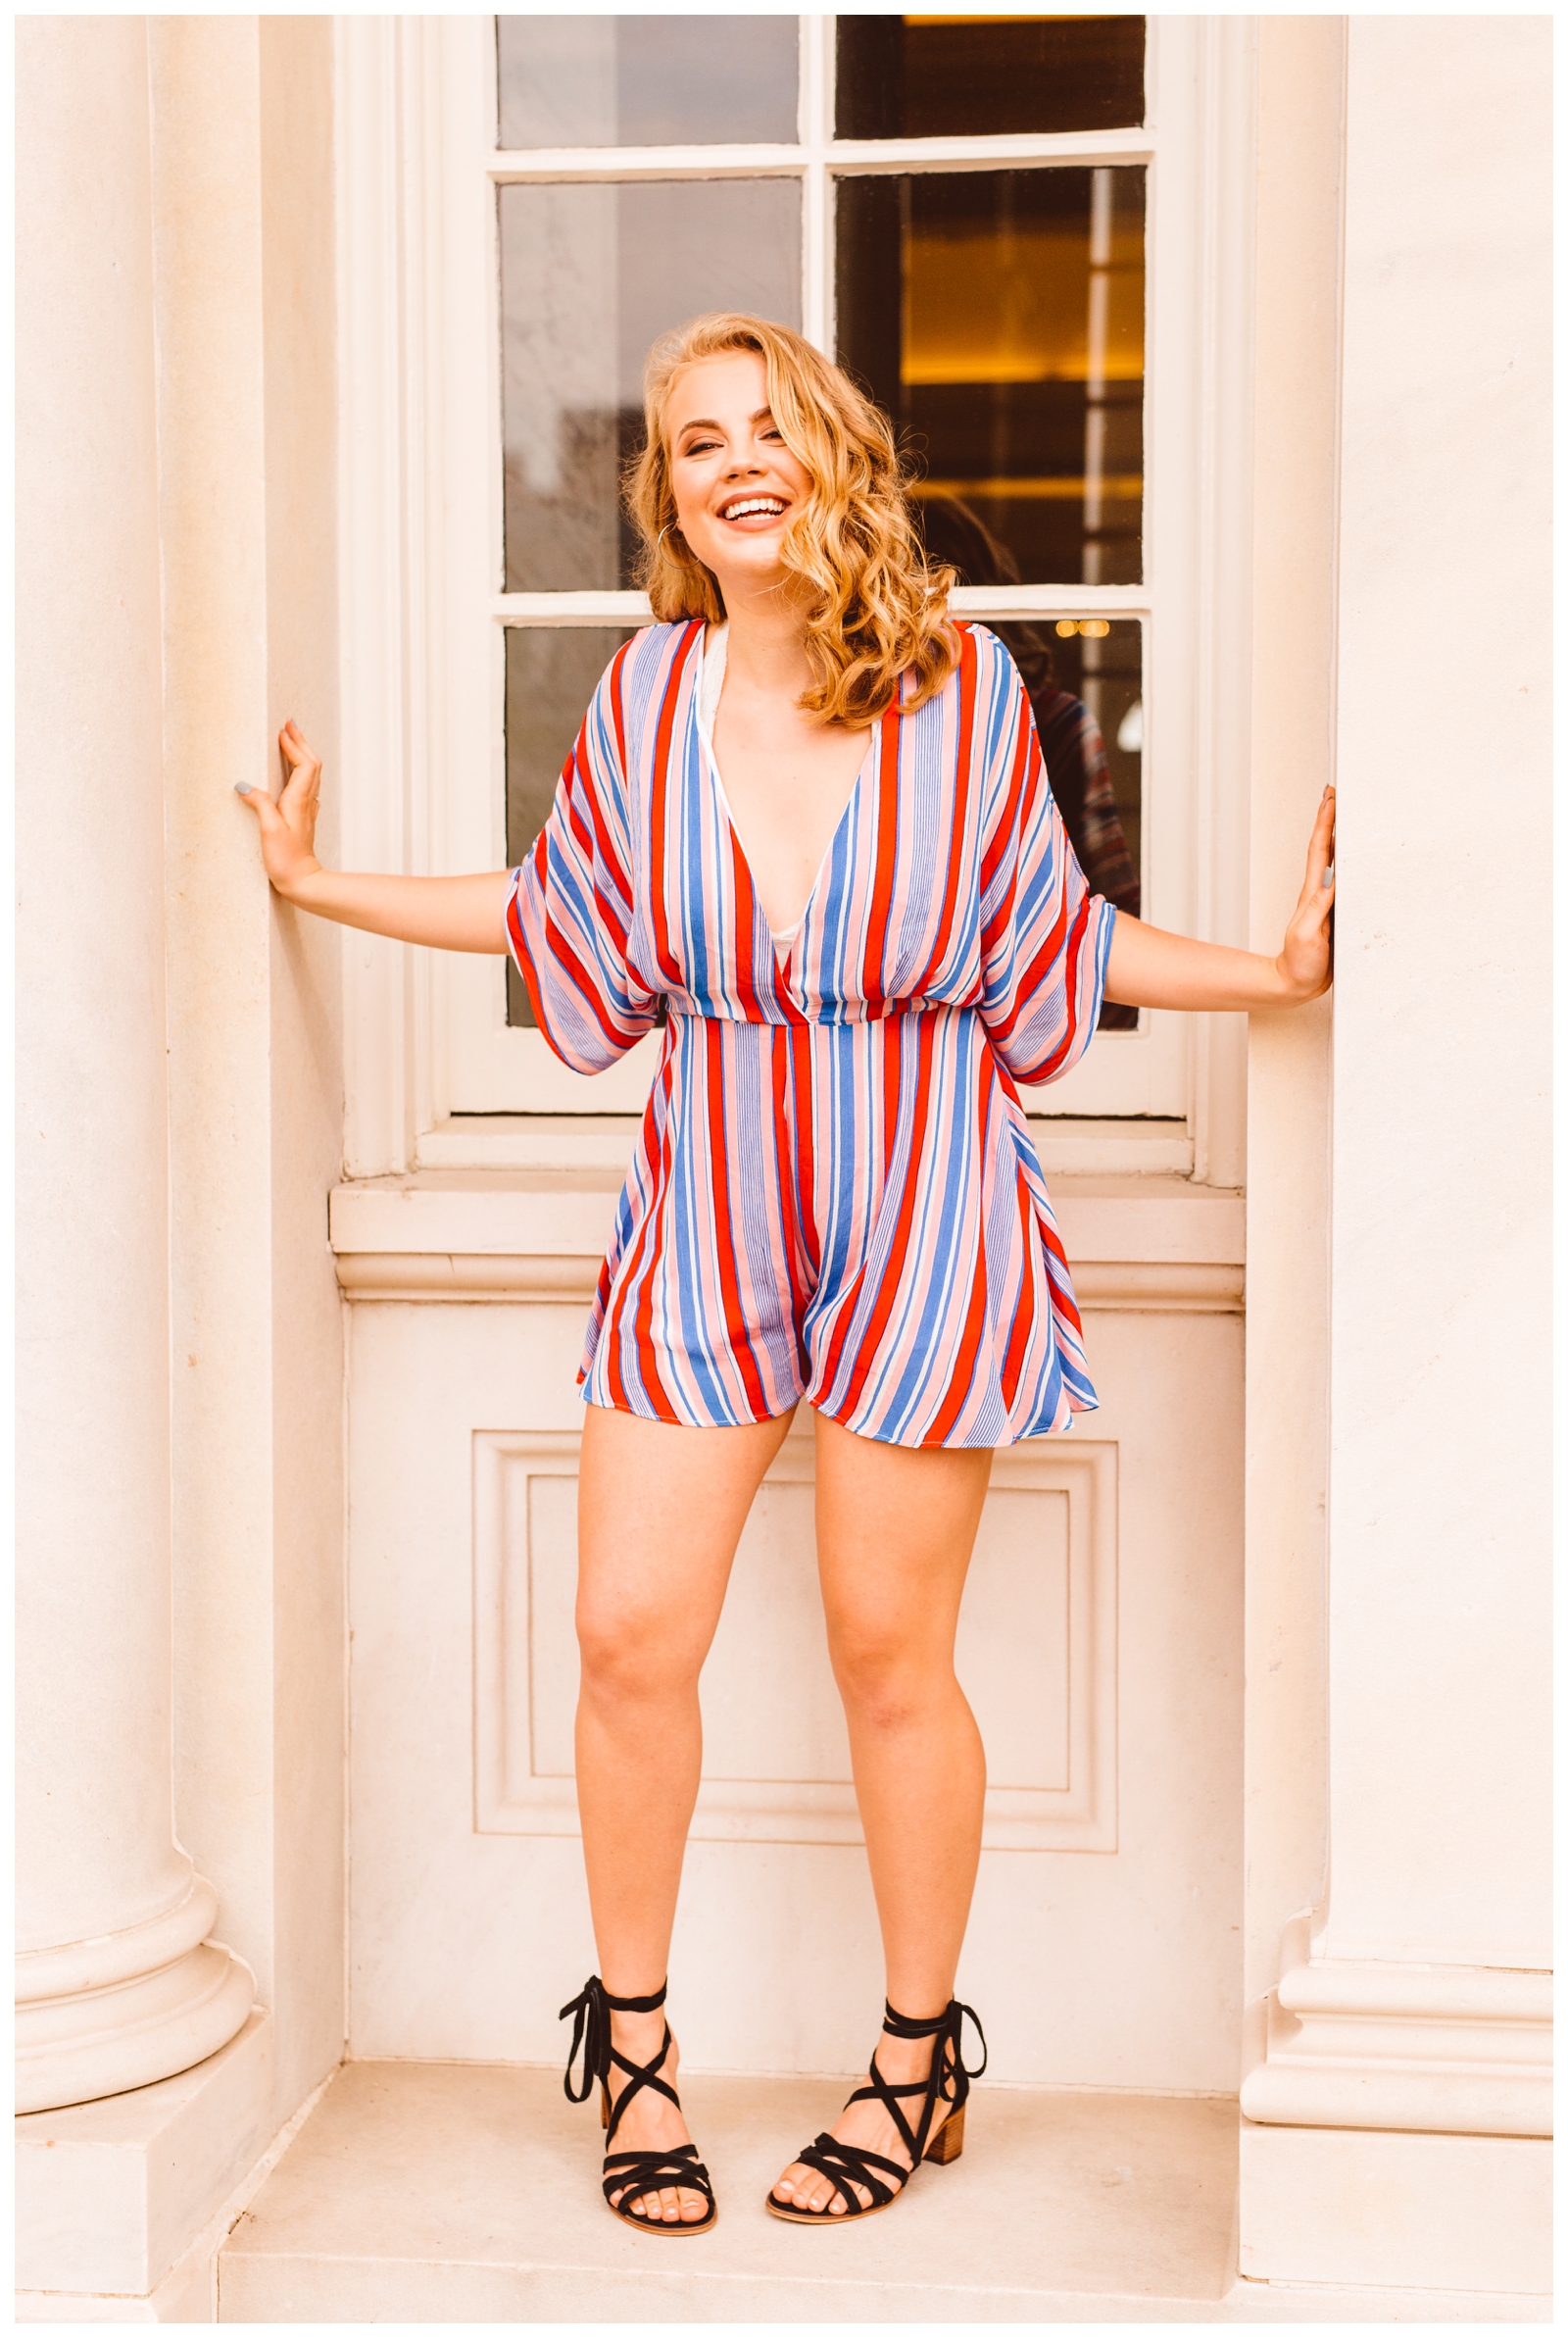 Downtown Annapolis Senior Session Inspiration -Brooke Michelle Photography